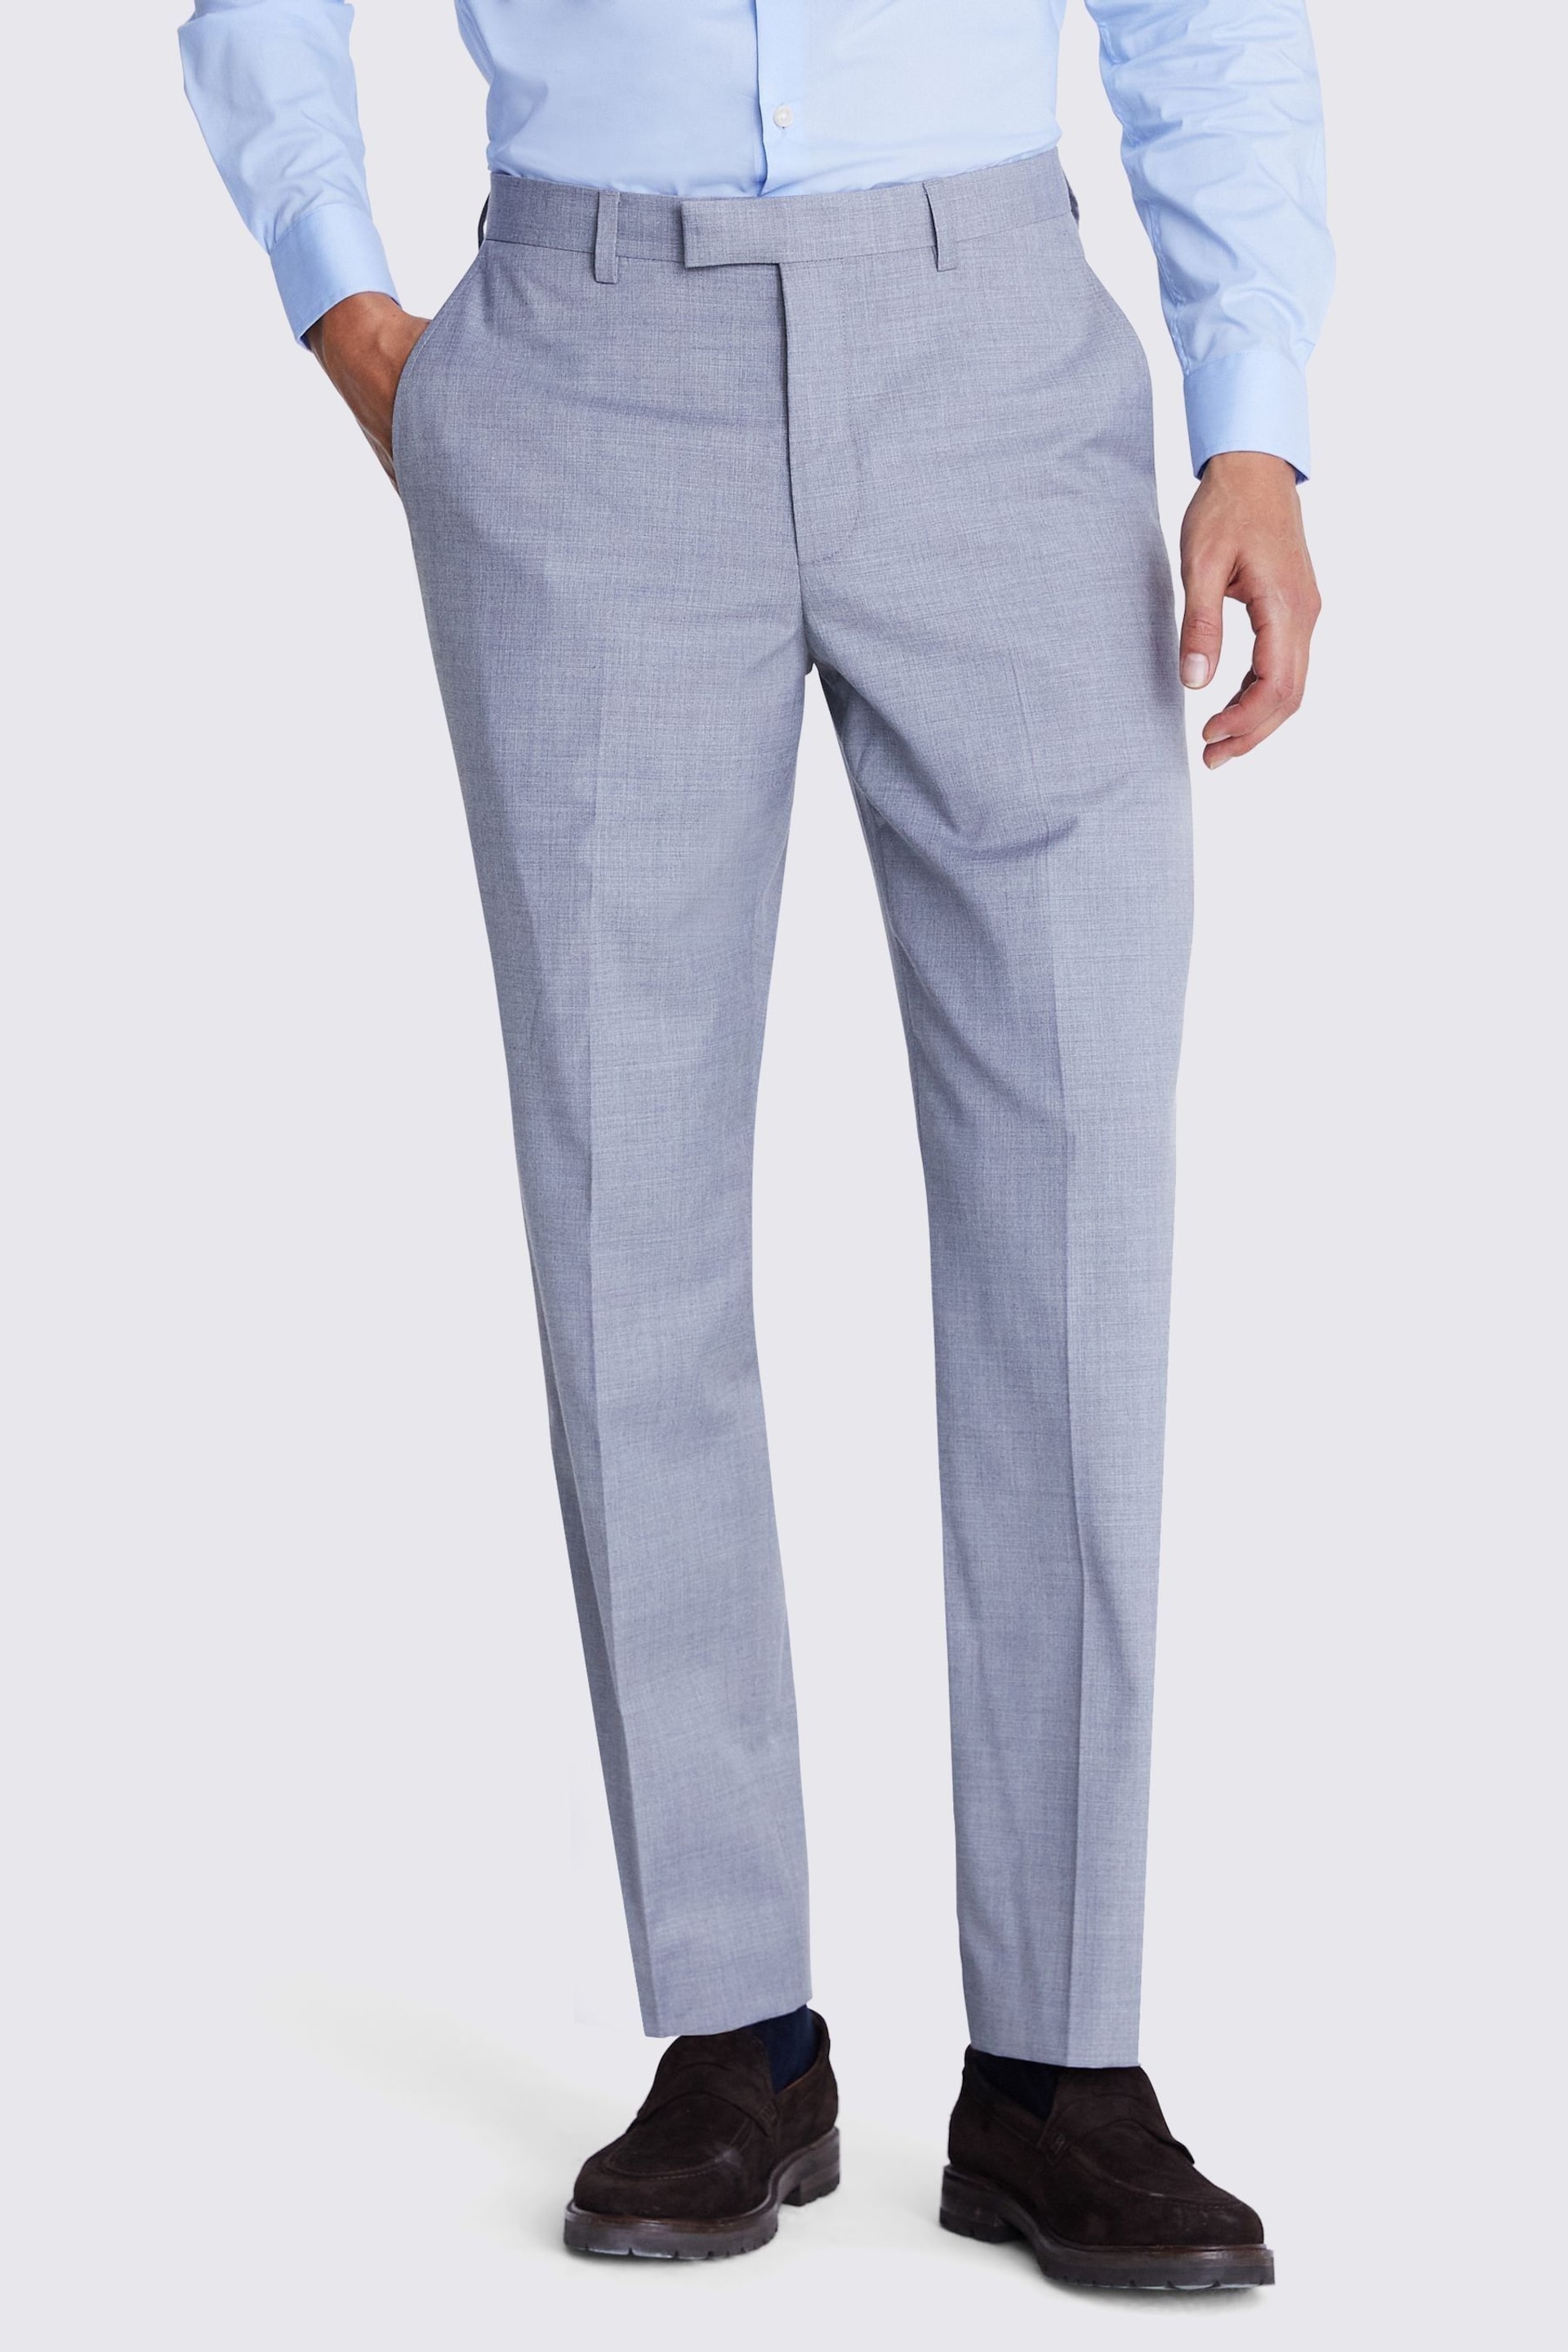 MOSS Grey Stretch Suit: Trousers - Image 1 of 3